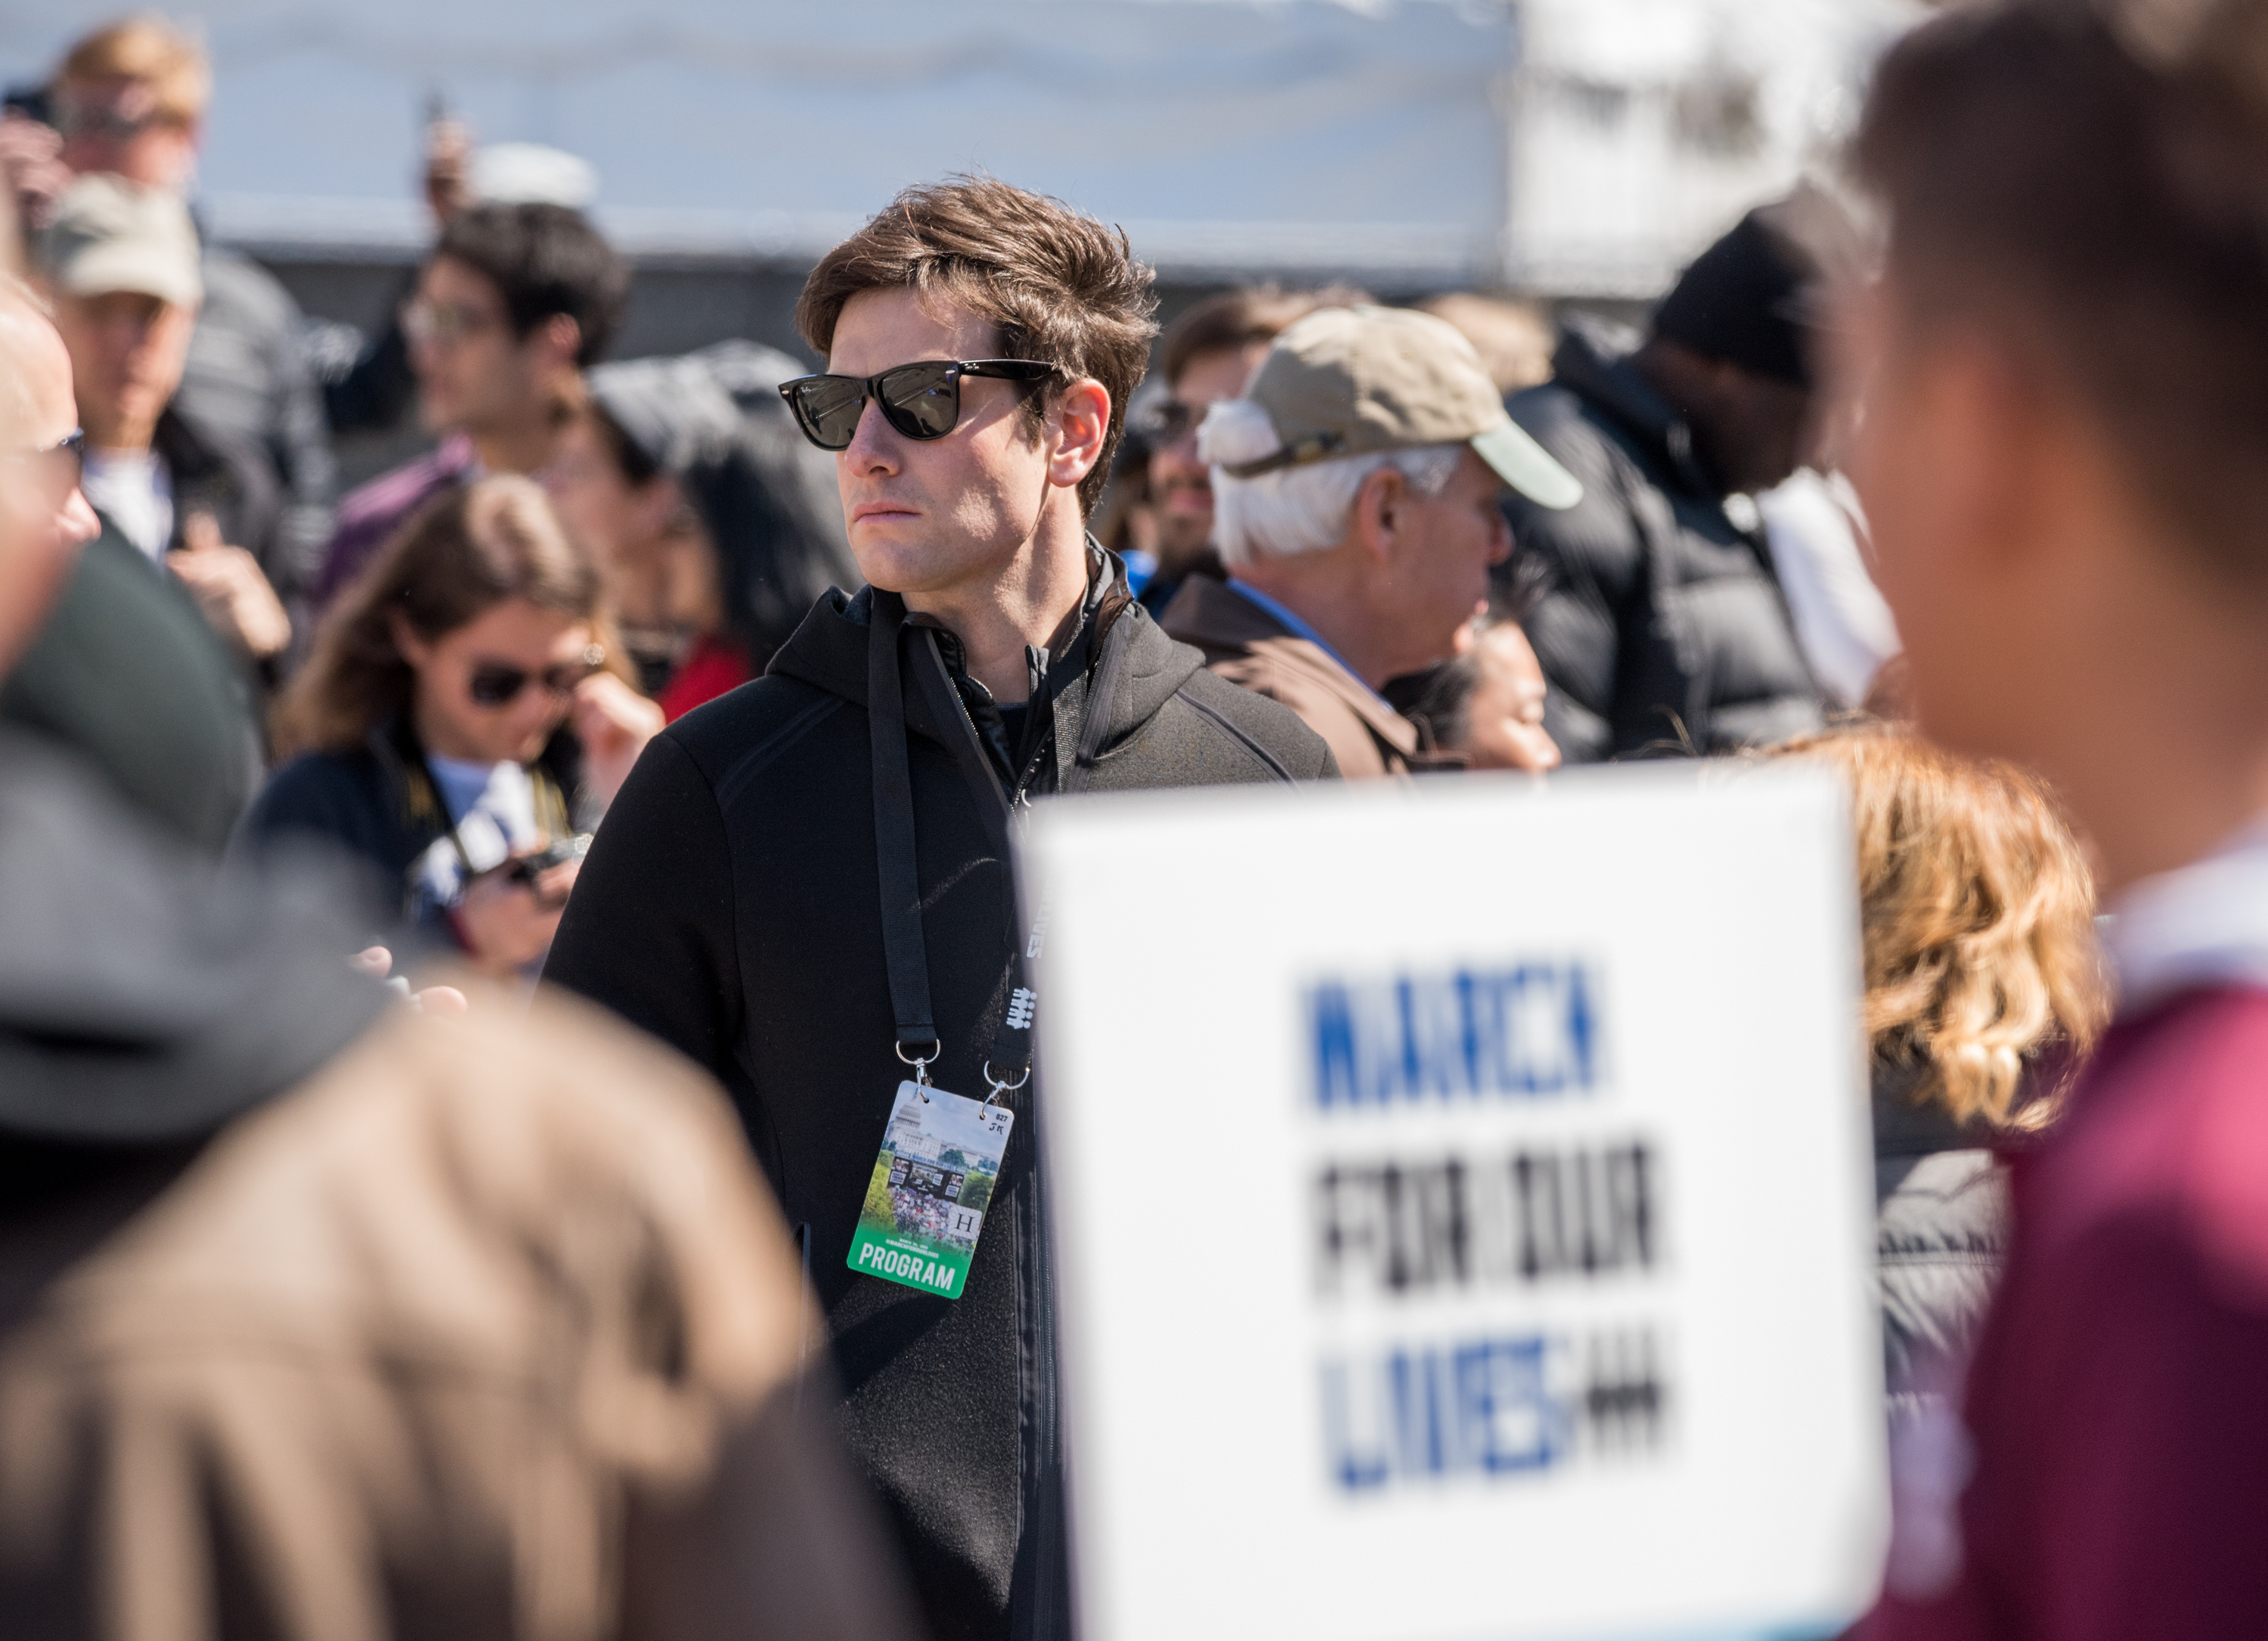 Joshua Kushner is seen during March For Our Lives on March 24, 2018 in Washington, DC. (Noam Galai&mdash;WireImage)